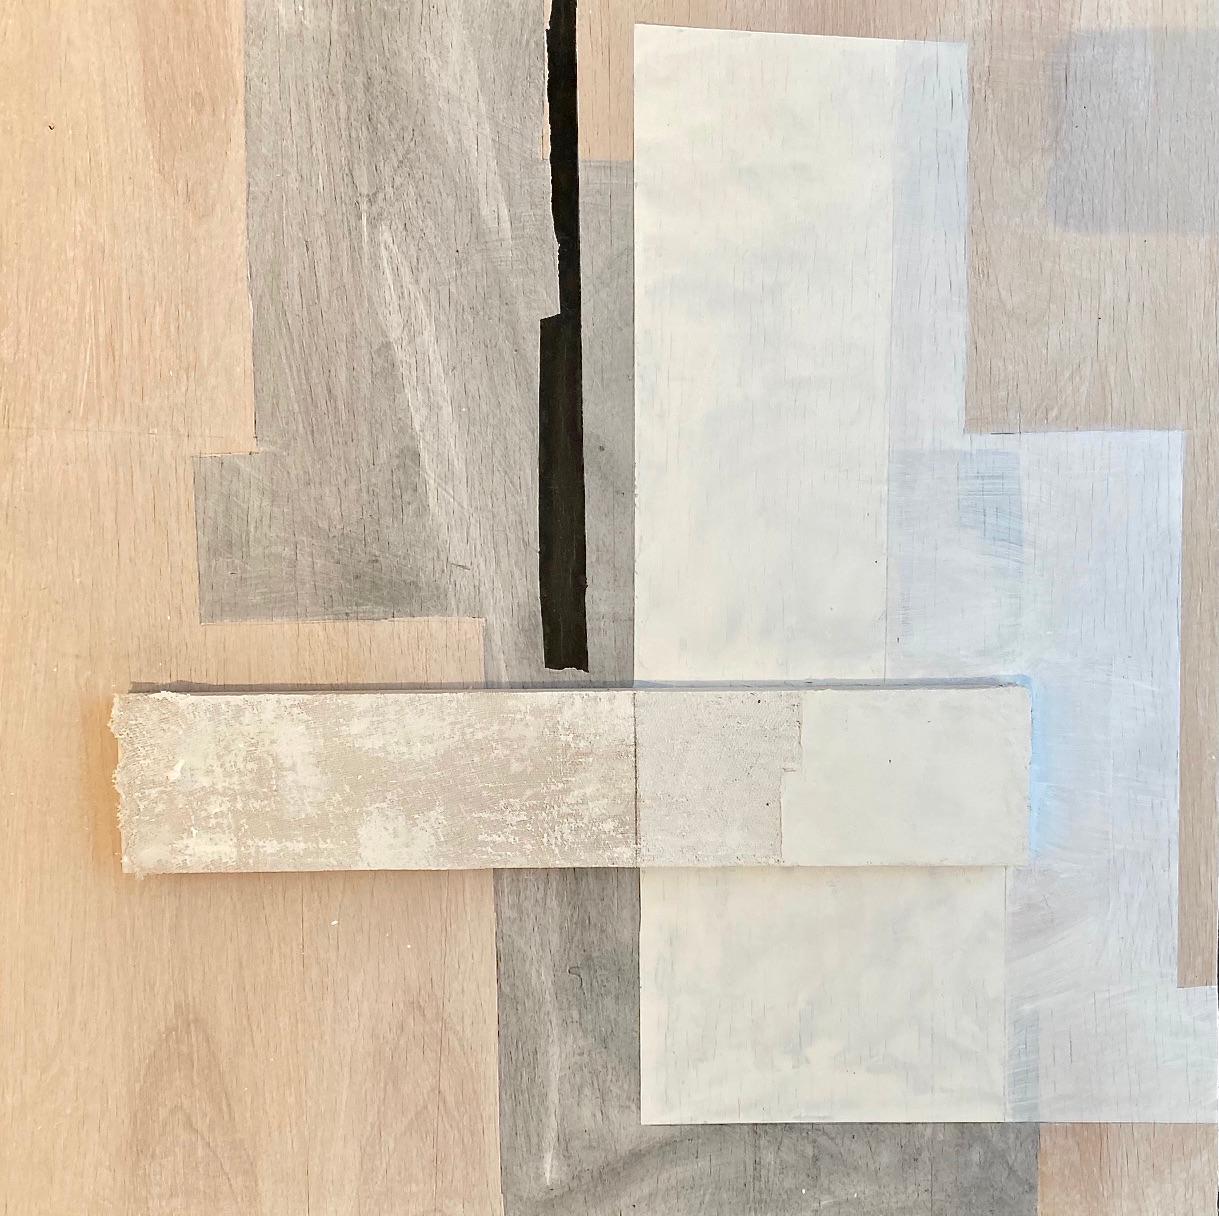 'Untitled'  Abstract Geometric Wall Piece Wood/Paint/Textile Black, White, Grays - Mixed Media Art by Jean Feinberg